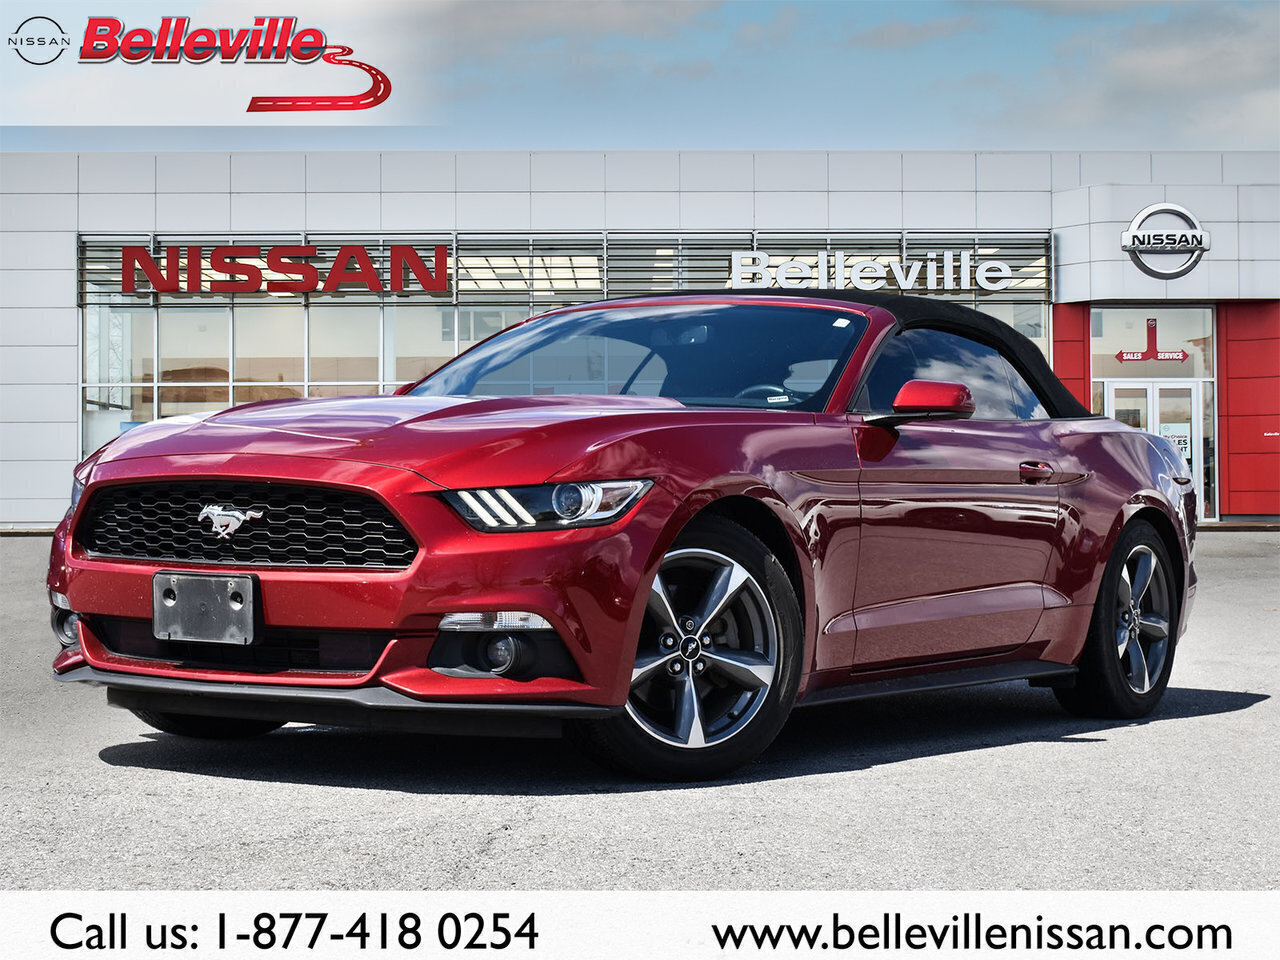 2017 Ford Mustang V6 -2 Door convertible, local trade, One Owner!